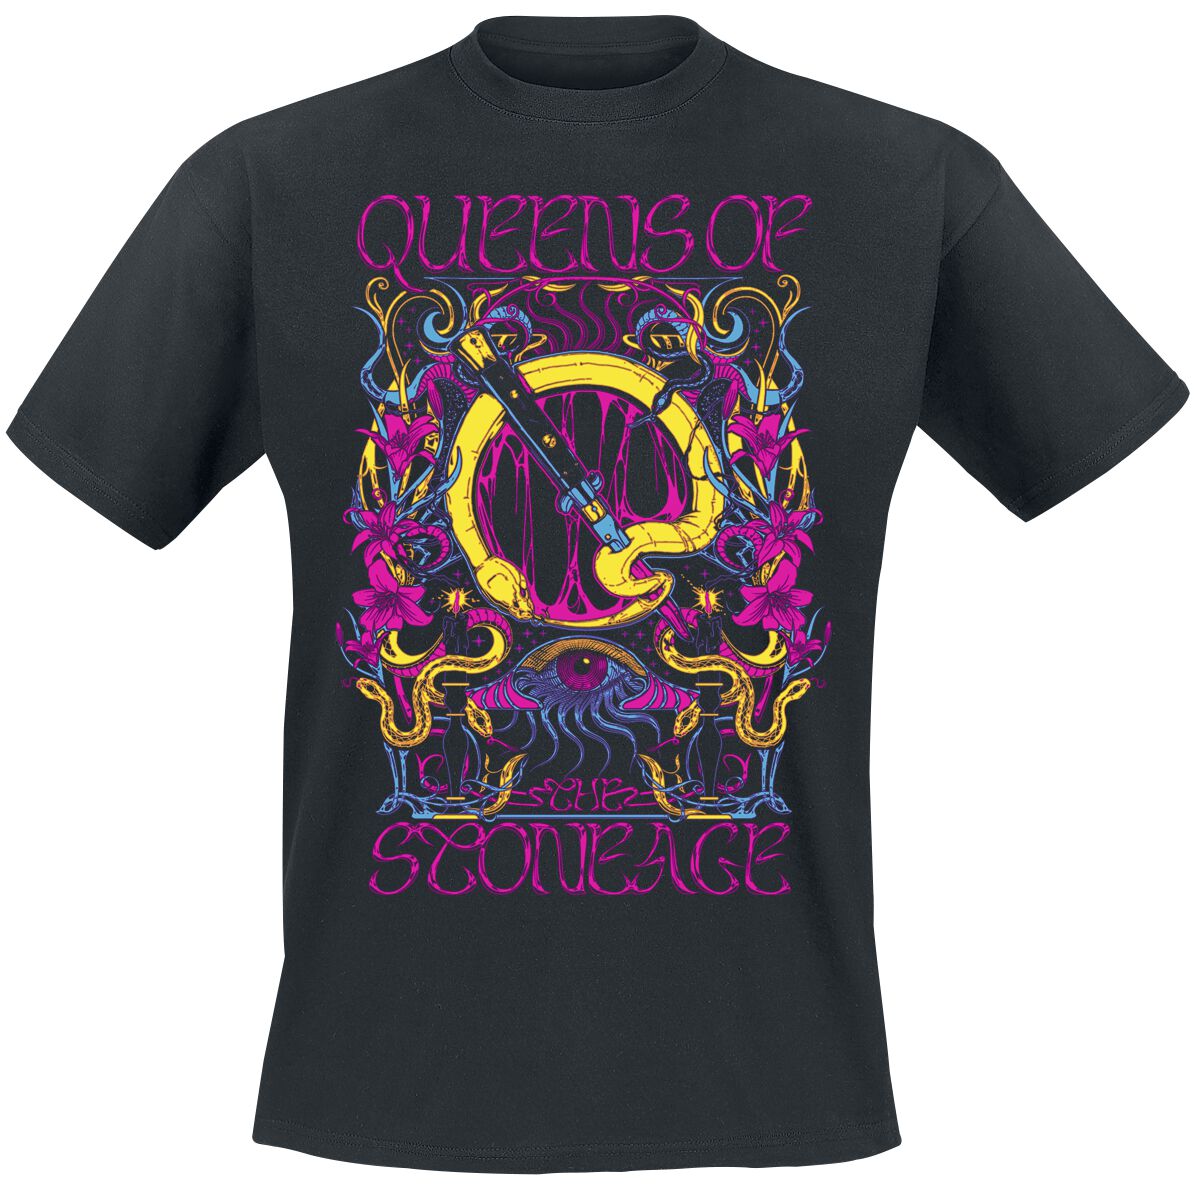 Queens Of The Stone Age In Times New Roman - Neon Sacrilege T-Shirt schwarz in L